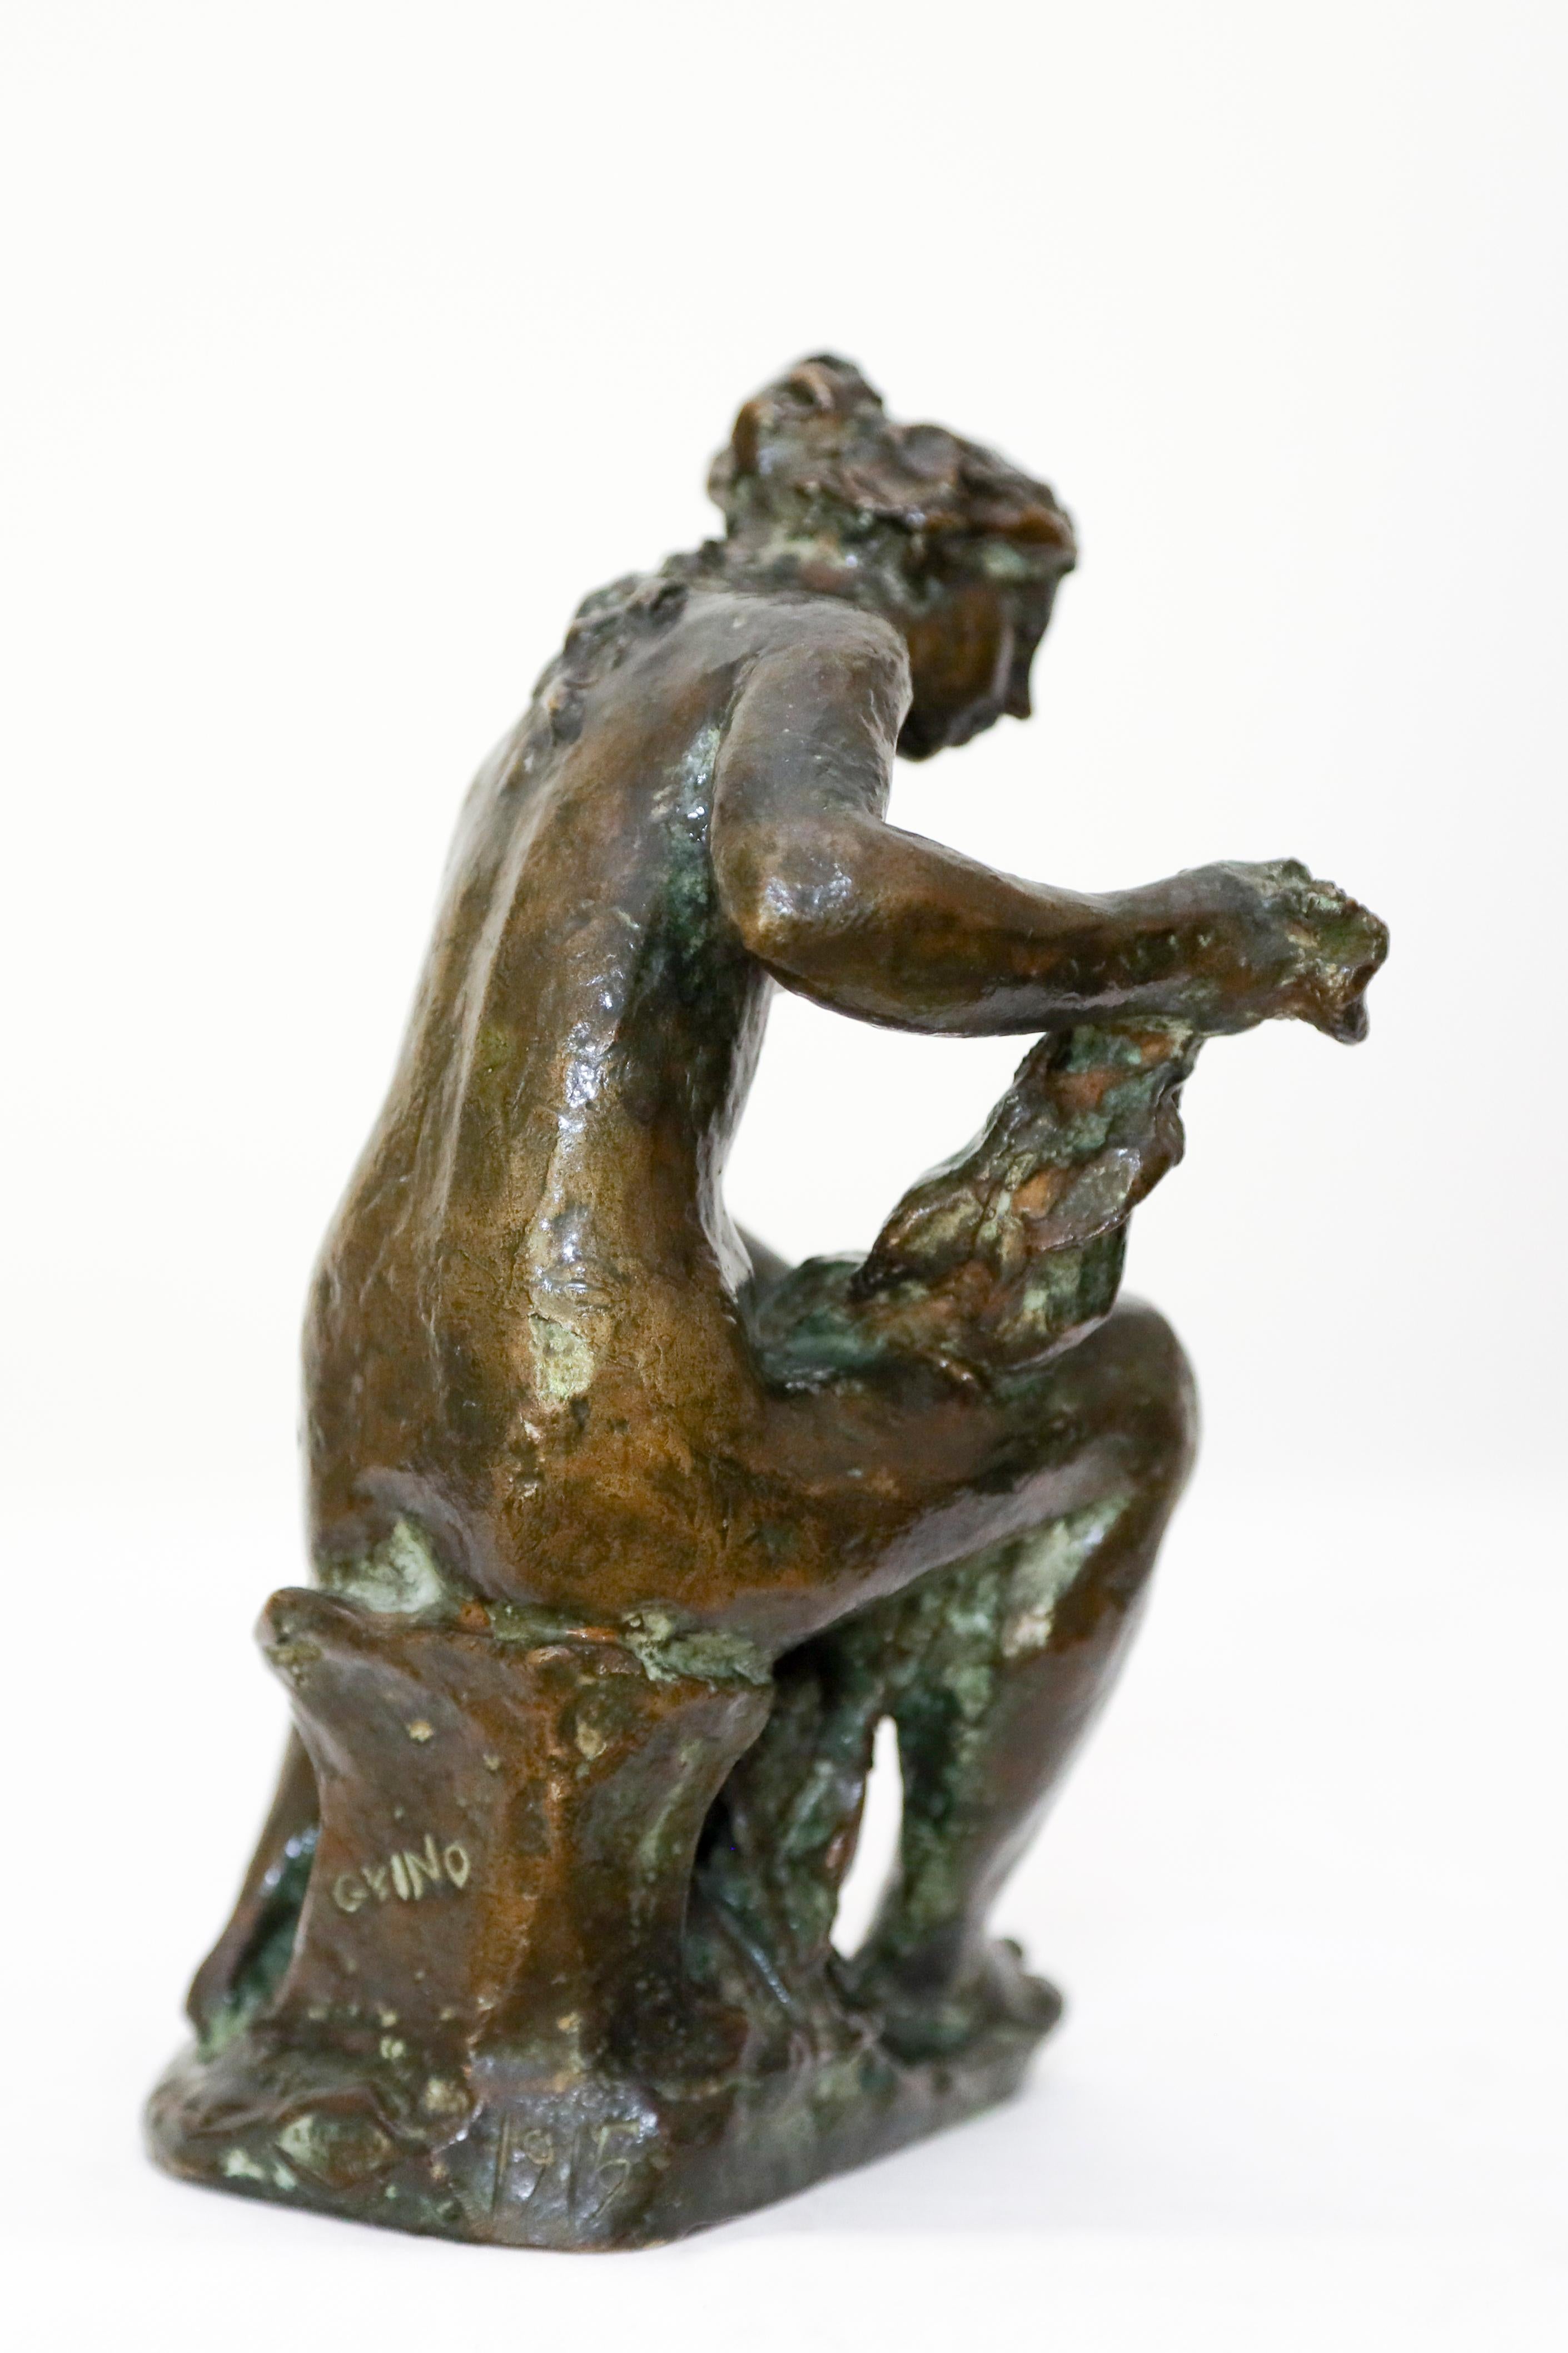 Seated Woman Bronze, Femme Assise a la Toiletter or Petite Baigneuse Assise - Gold Figurative Sculpture by Richard Guino